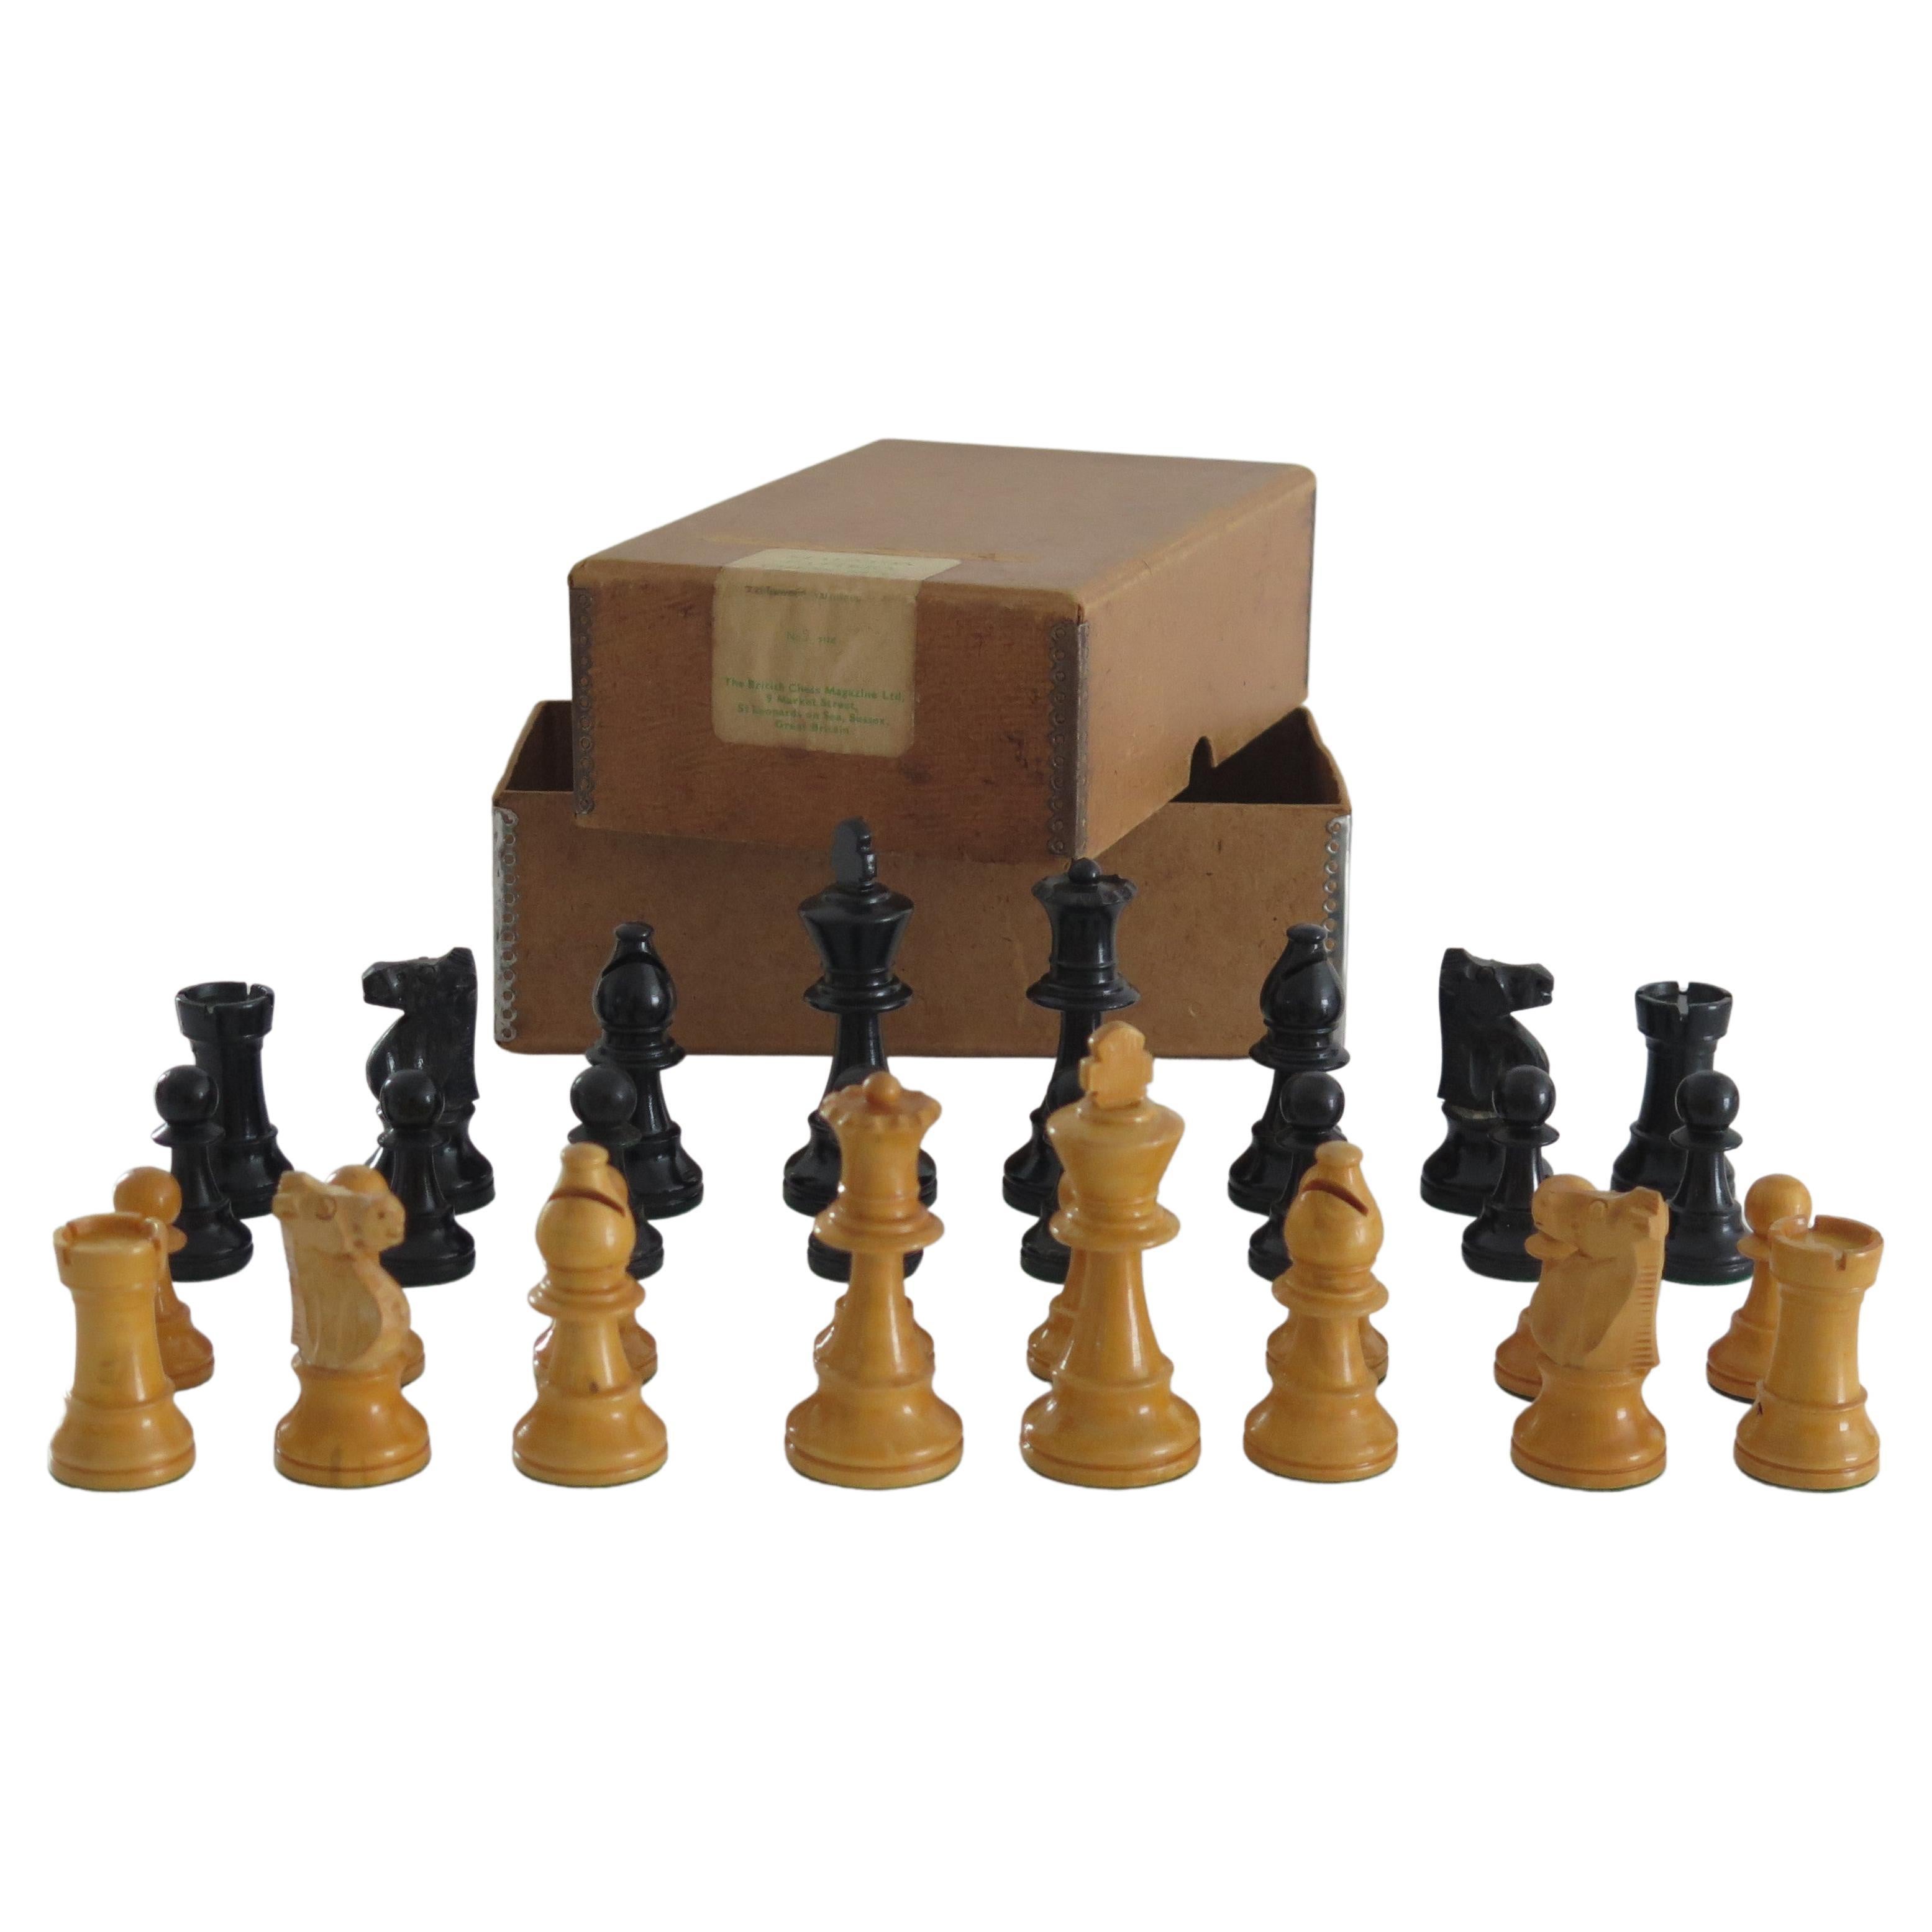 Weighted Club Chess Set Kings Staunton Pattern No. 5 Boxed, Circa 1930 For Sale